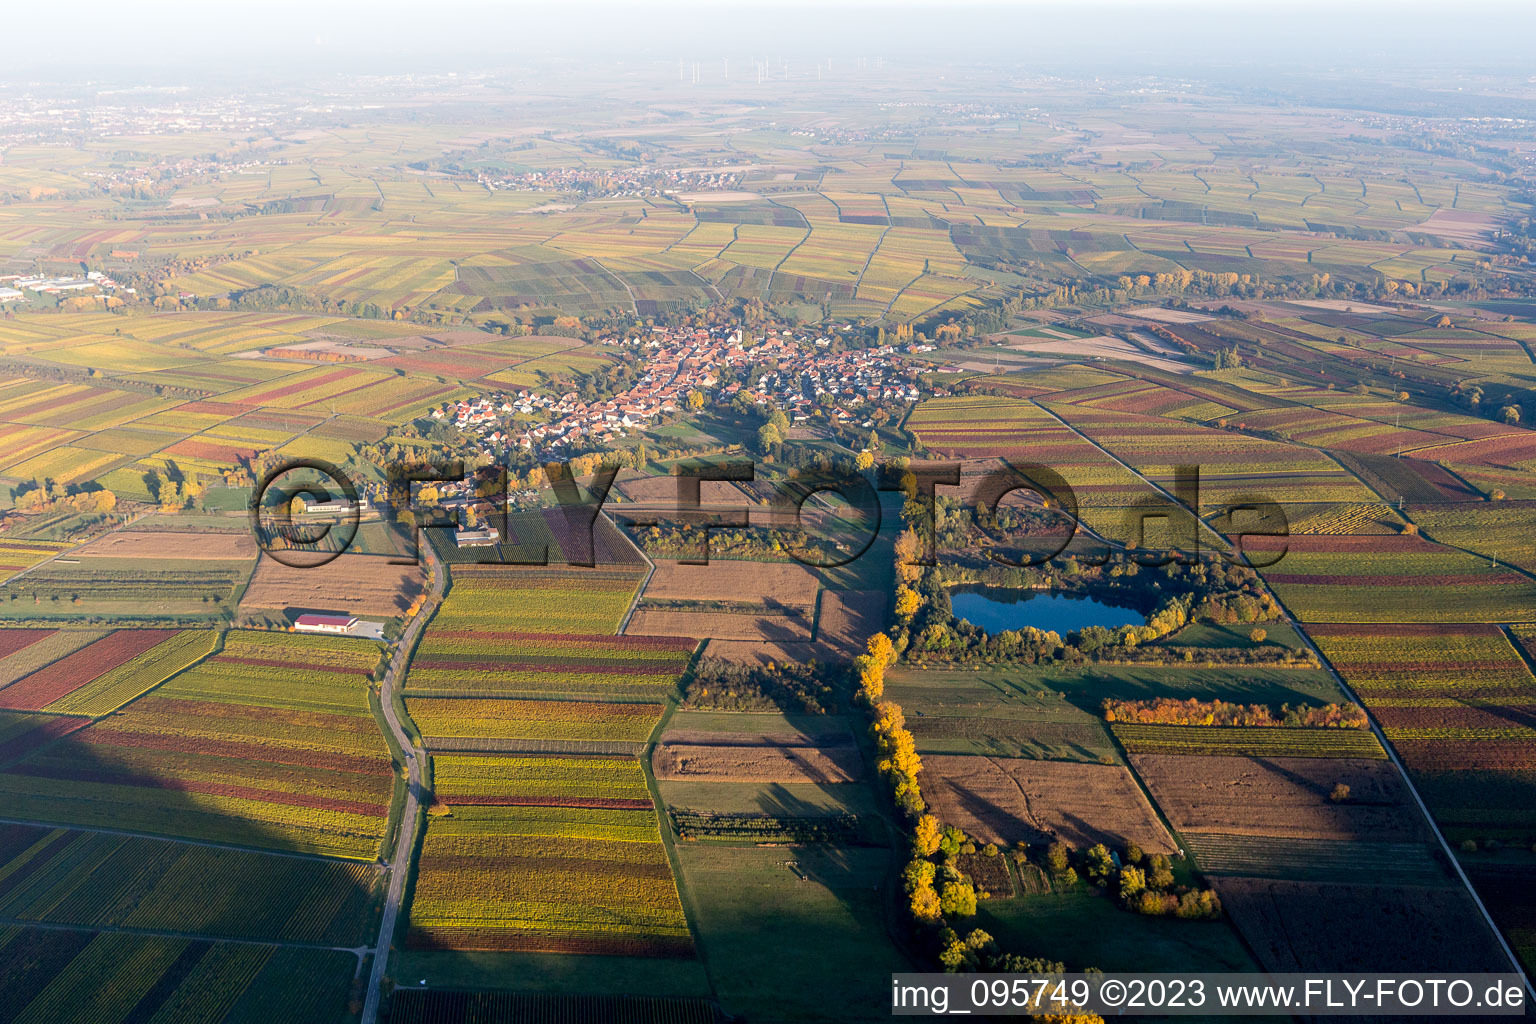 Göcklingen in the state Rhineland-Palatinate, Germany from above